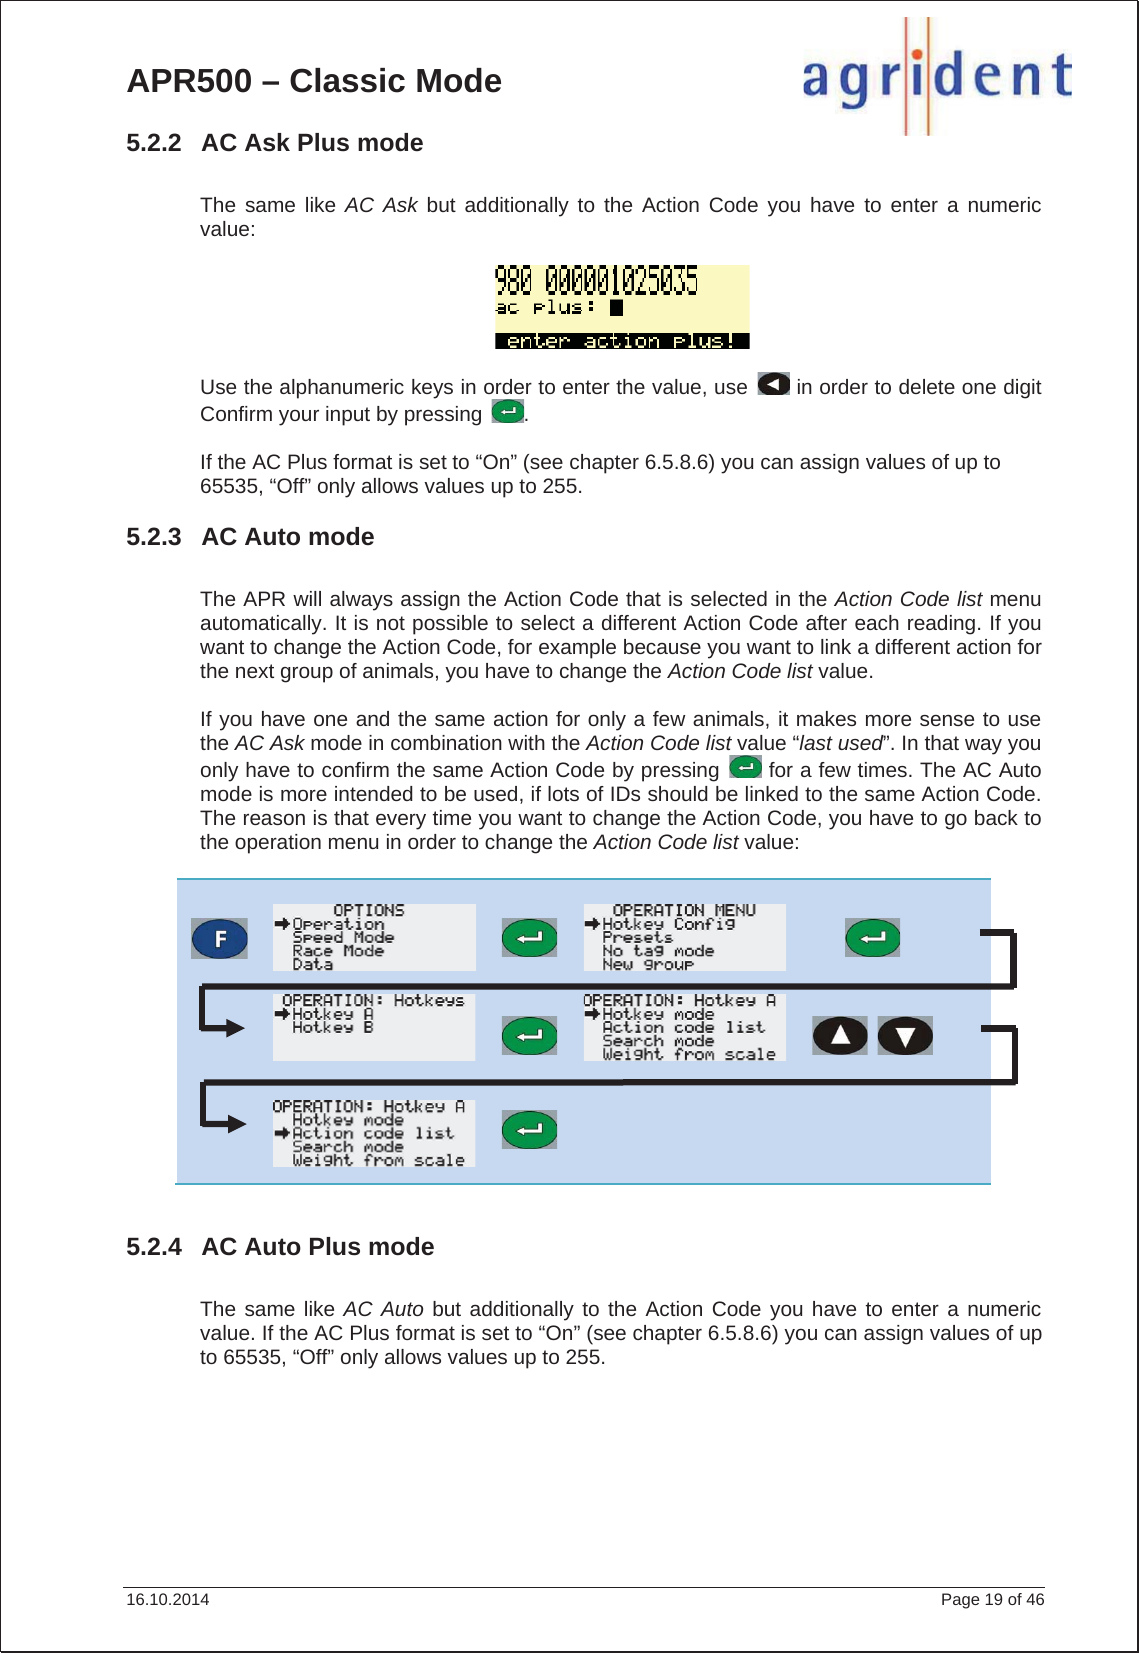 APR500 – Classic Mode 16.10.2014    Page 19 of 46 5.2.2  AC Ask Plus mode The same like AC Ask but additionally to the Action Code you have to enter a numeric value:Use the alphanumeric keys in order to enter the value, use   in order to delete one digit Confirm your input by pressing  . If the AC Plus format is set to “On” (see chapter 6.5.8.6) you can assign values of up to 65535, “Off” only allows values up to 255. 5.2.3  AC Auto mode The APR will always assign the Action Code that is selected in the Action Code list menu automatically. It is not possible to select a different Action Code after each reading. If you want to change the Action Code, for example because you want to link a different action for the next group of animals, you have to change the Action Code list value.If you have one and the same action for only a few animals, it makes more sense to use the AC Ask mode in combination with the Action Code list value “last used”. In that way you only have to confirm the same Action Code by pressing   for a few times. The AC Auto mode is more intended to be used, if lots of IDs should be linked to the same Action Code. The reason is that every time you want to change the Action Code, you have to go back to the operation menu in order to change the Action Code list value:5.2.4  AC Auto Plus mode The same like AC Auto but additionally to the Action Code you have to enter a numeric value. If the AC Plus format is set to “On” (see chapter 6.5.8.6) you can assign values of up to 65535, “Off” only allows values up to 255. 